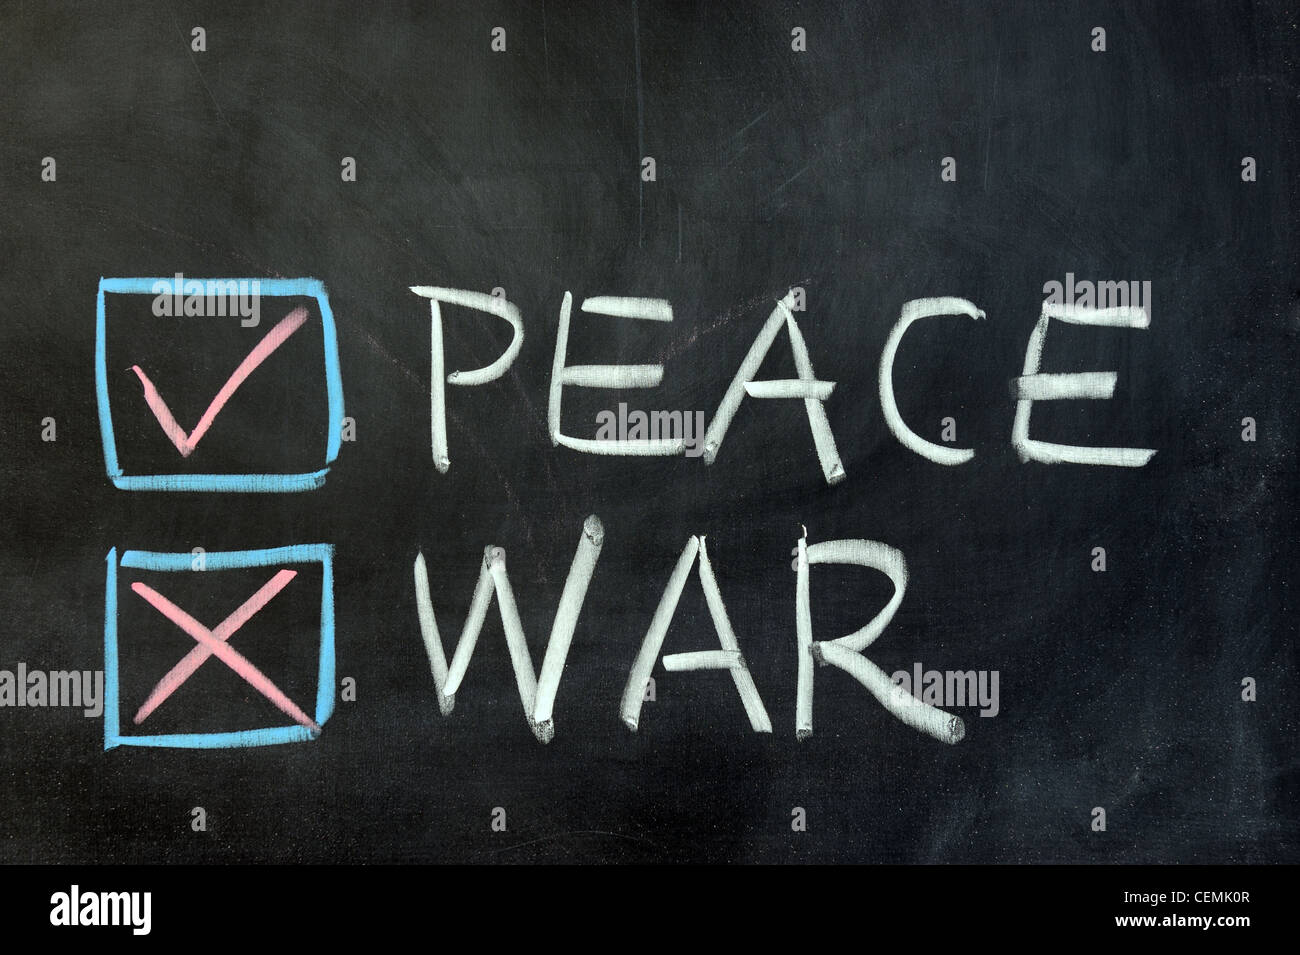 Chalk drawing - choose between peace and war Stock Photo